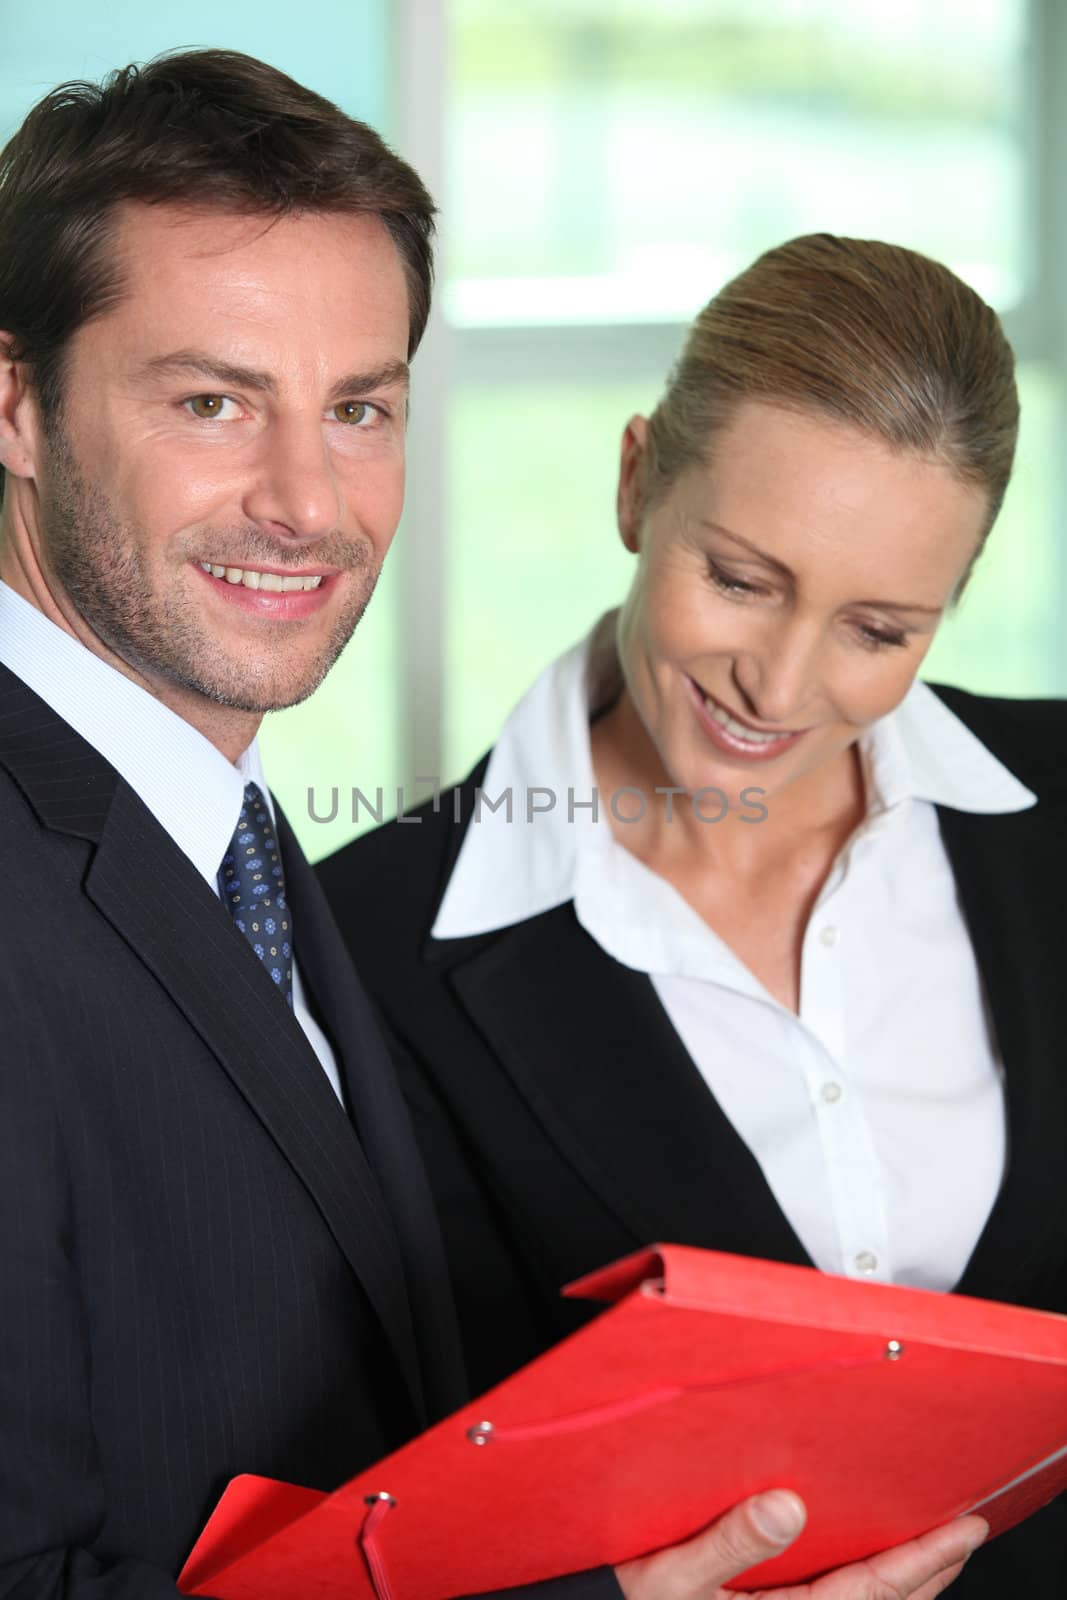 Businesswoman looking at businessman's notes by phovoir